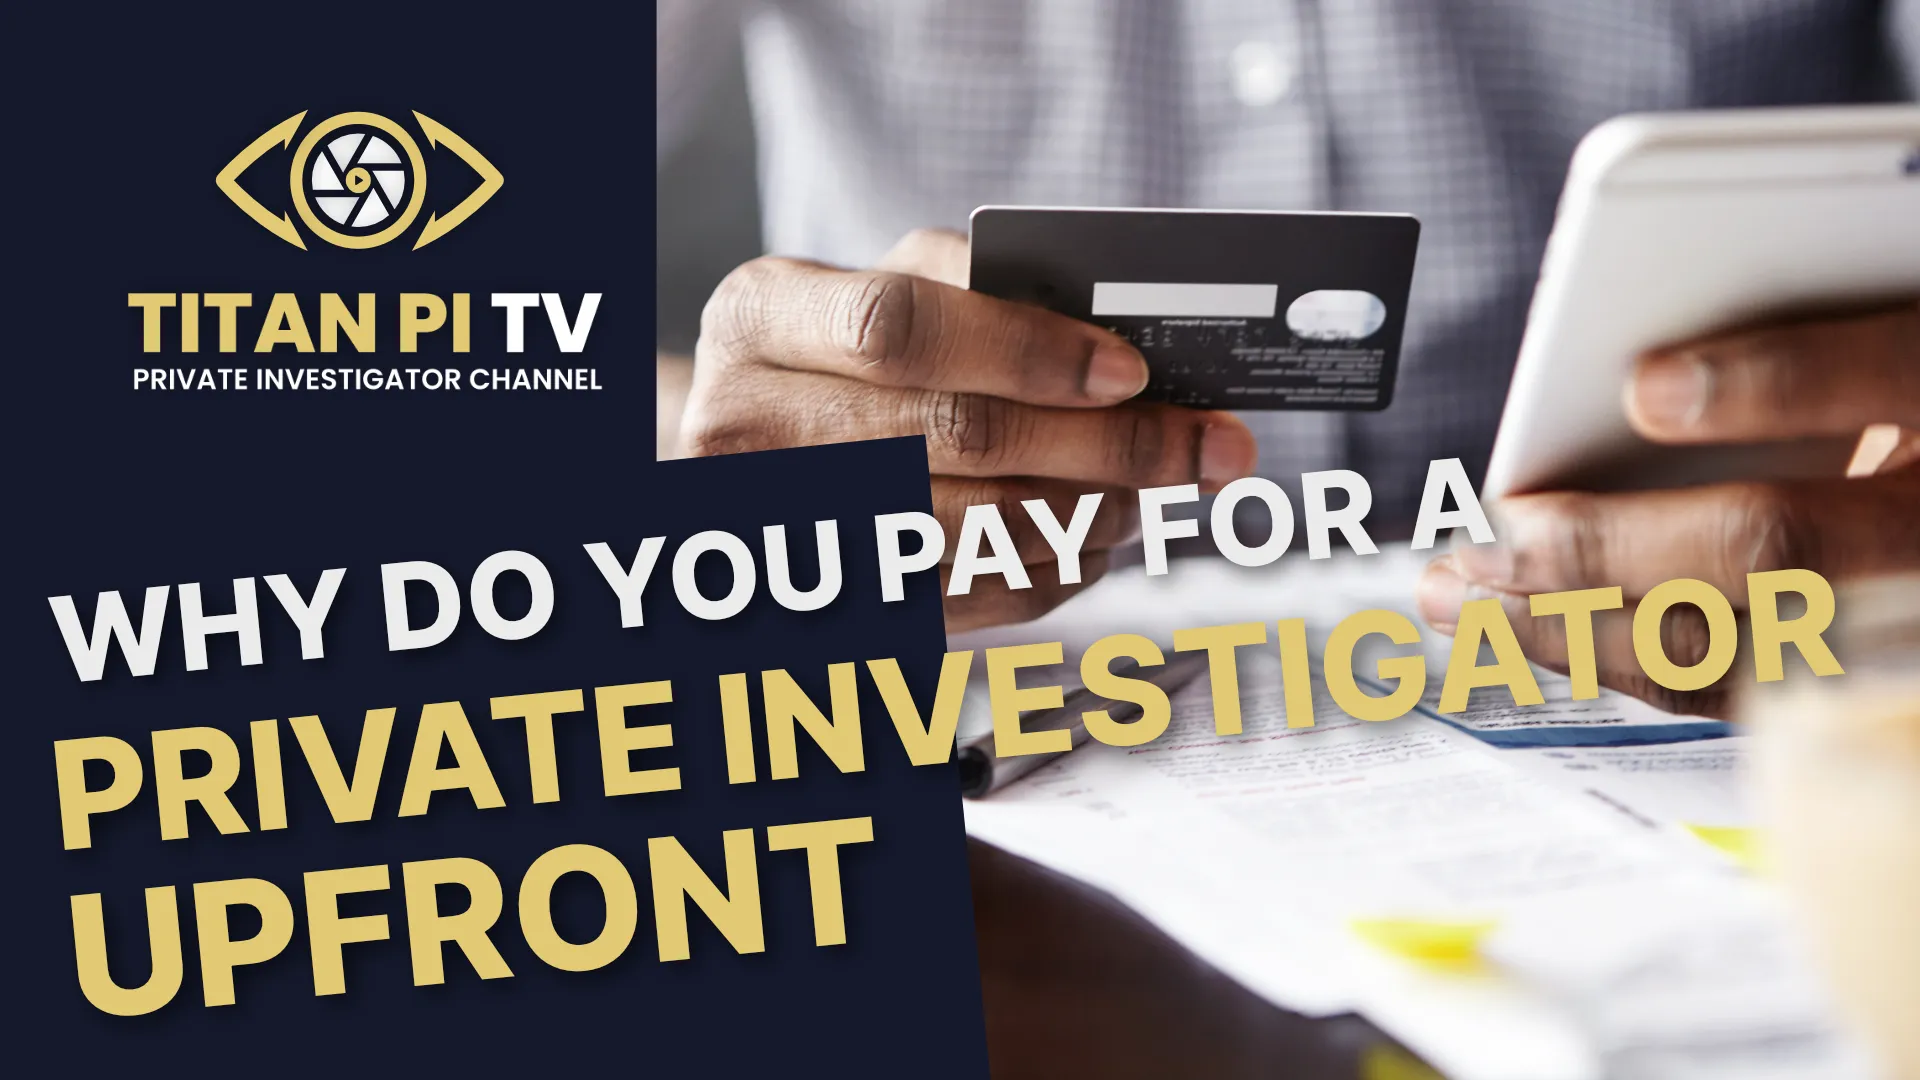 Why do you pay for a private investigator upfront? | Titan PI TV